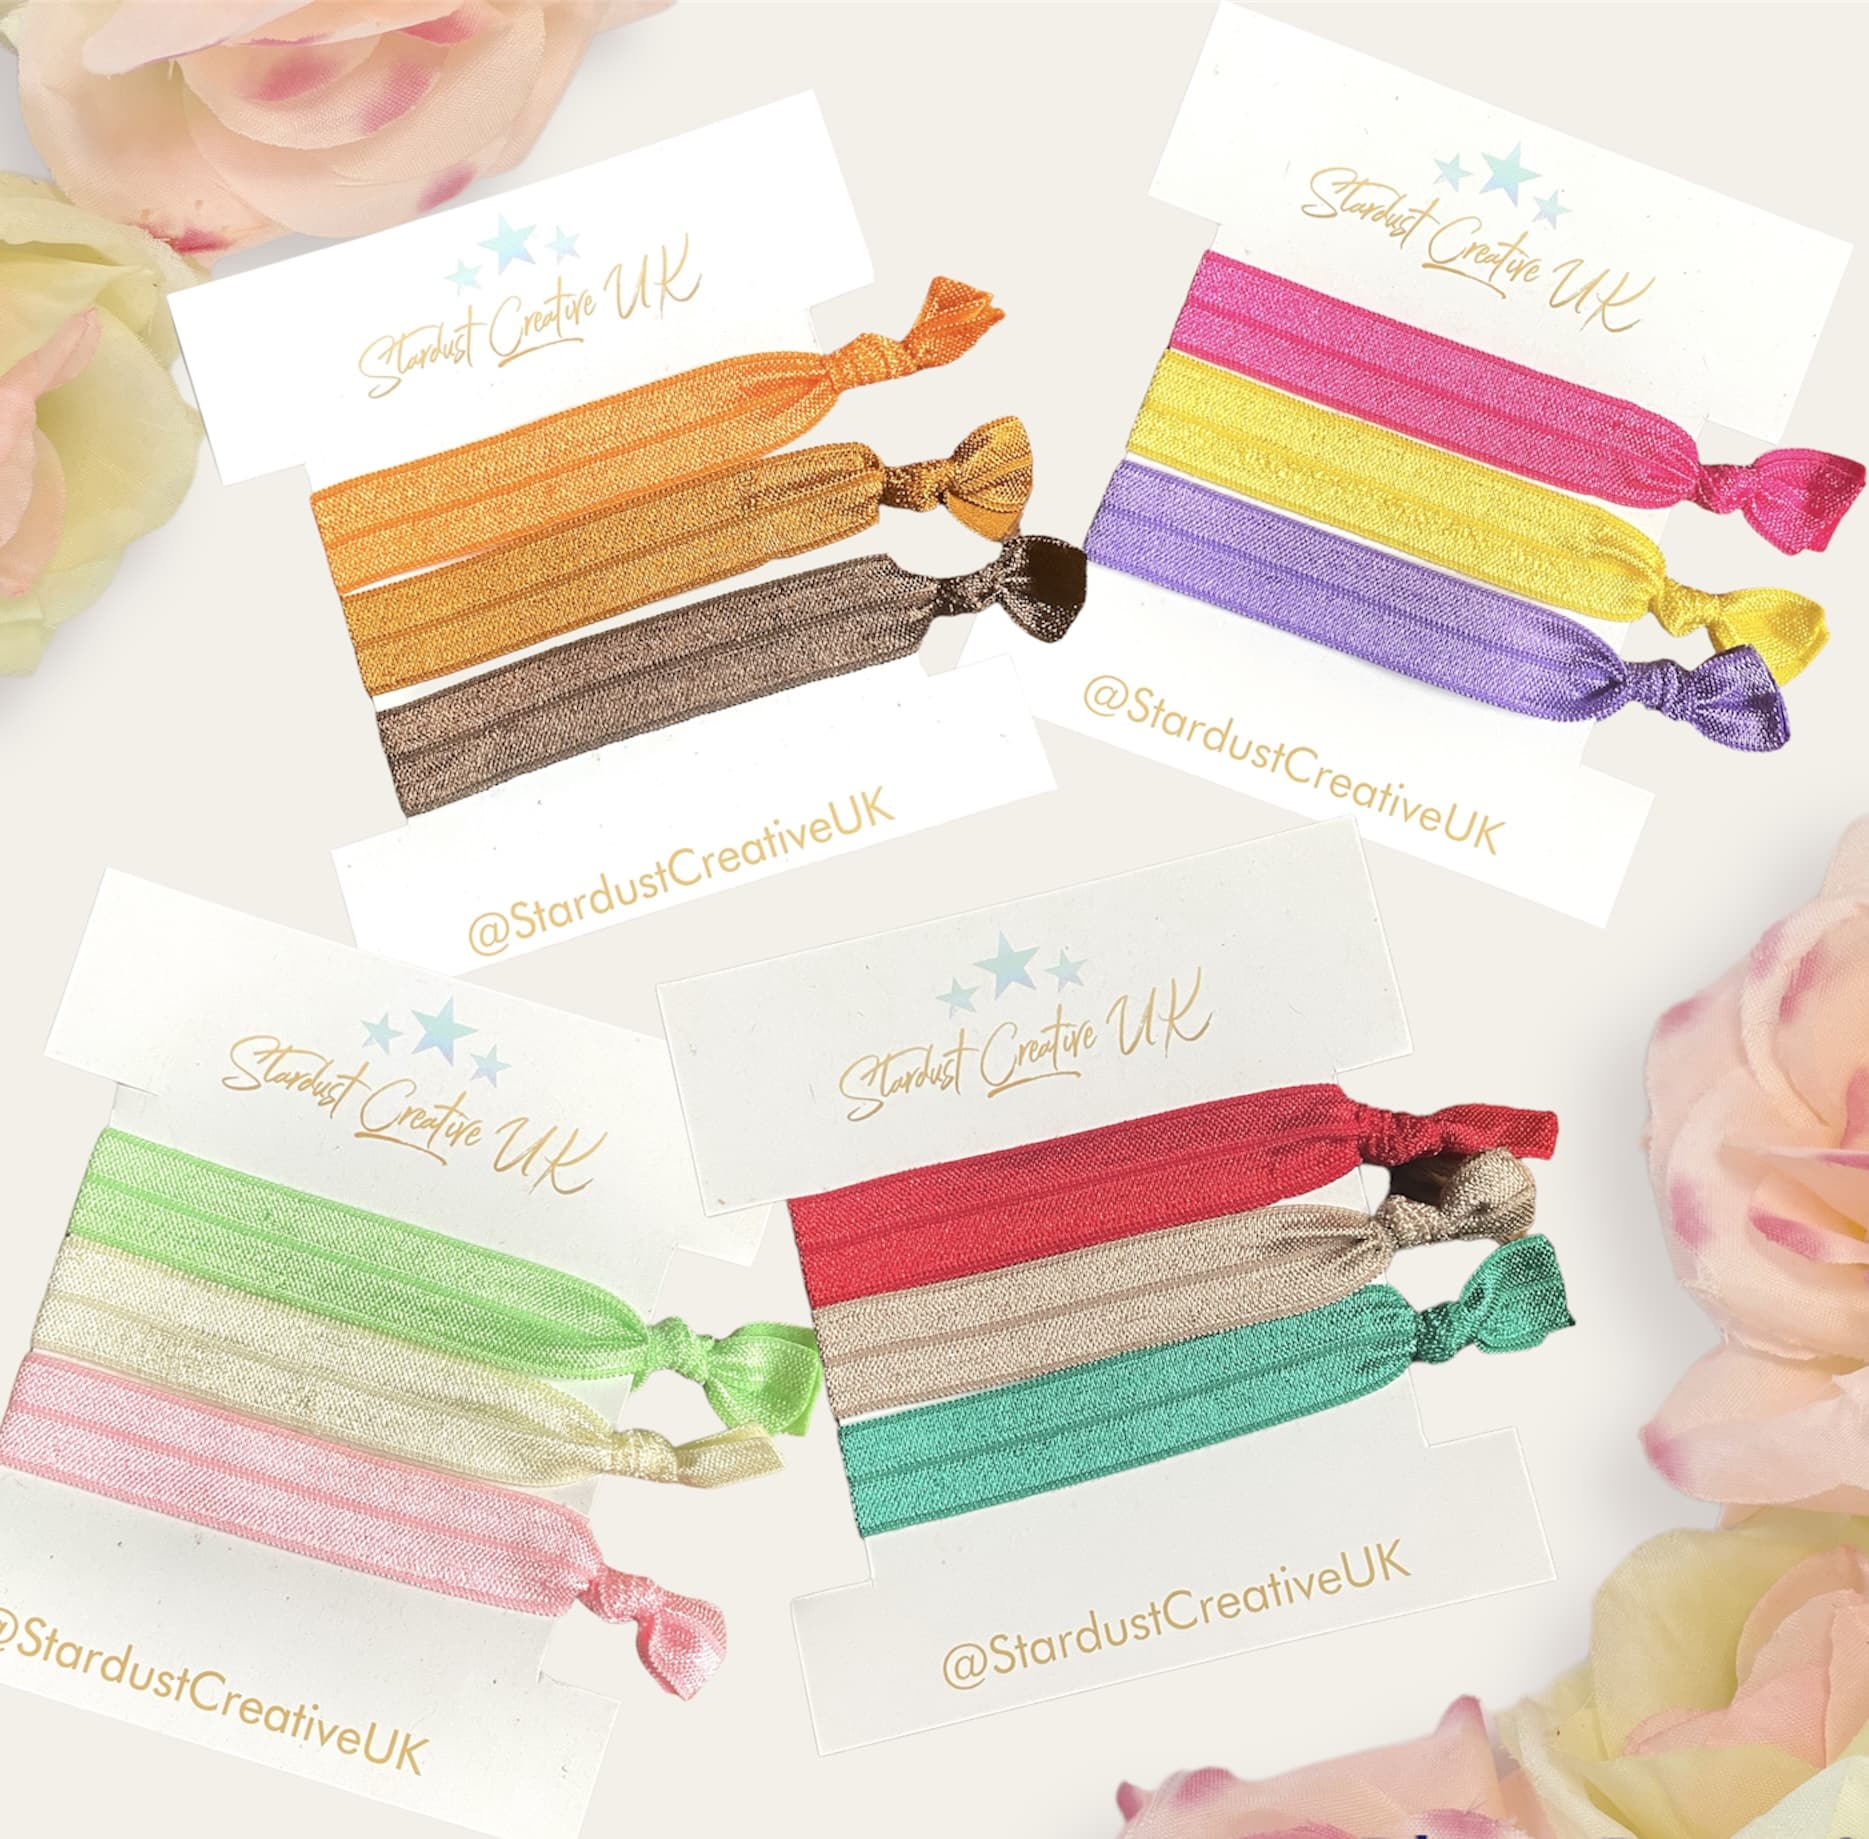 Soft stretchy shimmering hair ties. Double up as cute wrist bands. Stocking filler gift idea! - main product image